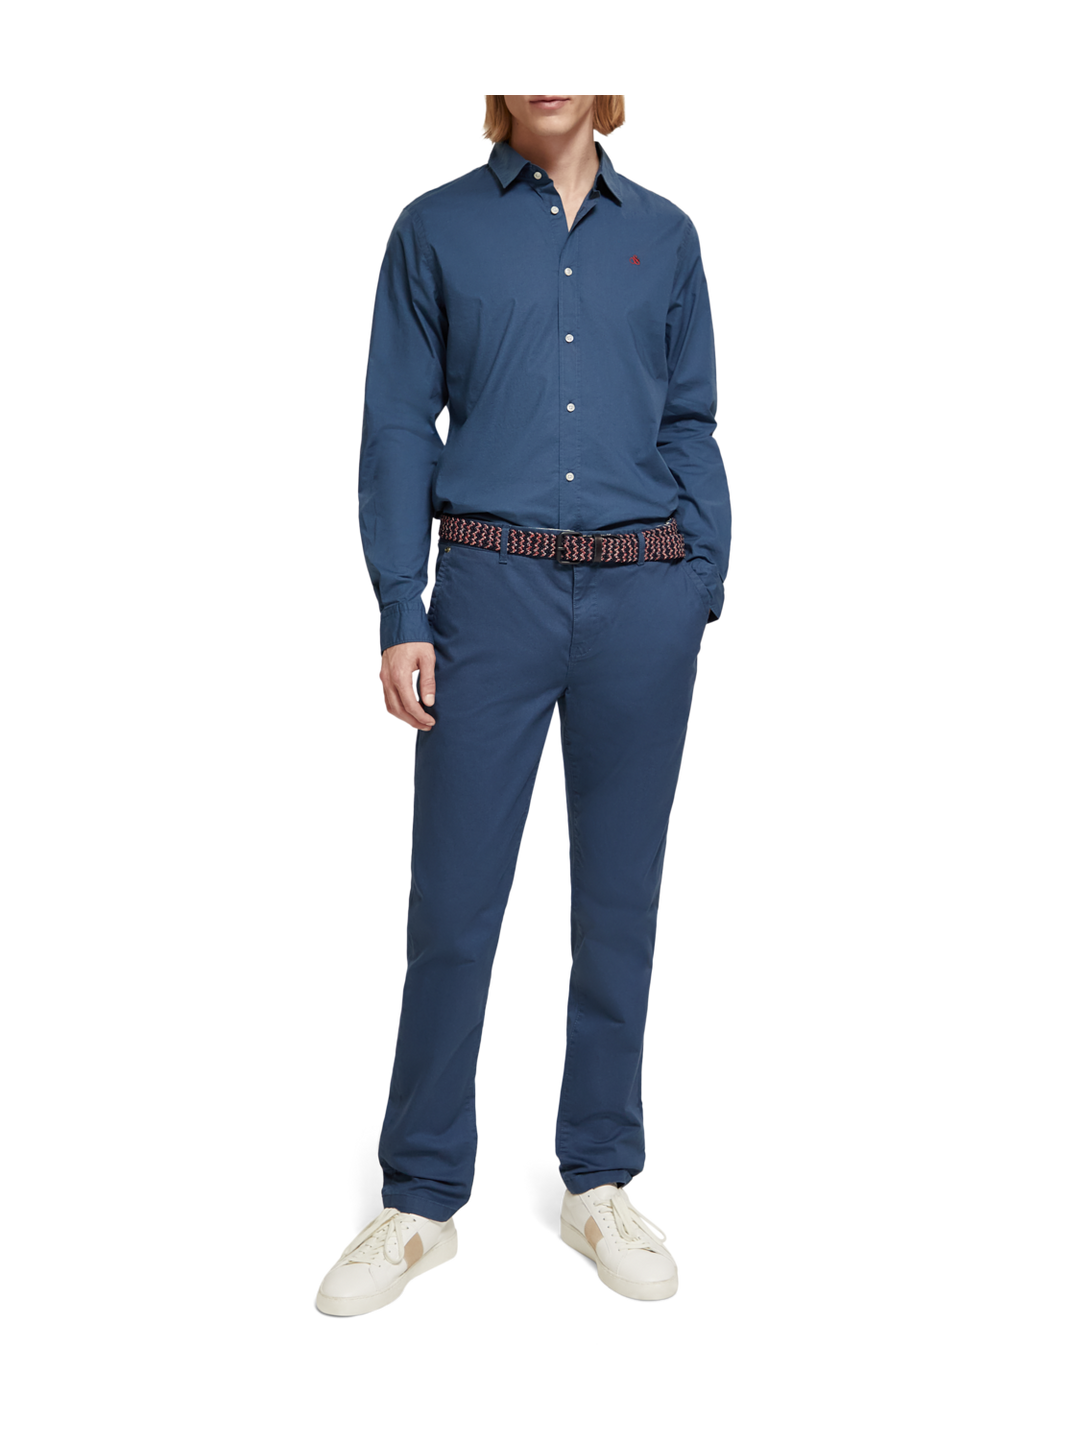 Essential Slim Fit Poplin Shirt in Storm Blue | Buster McGee